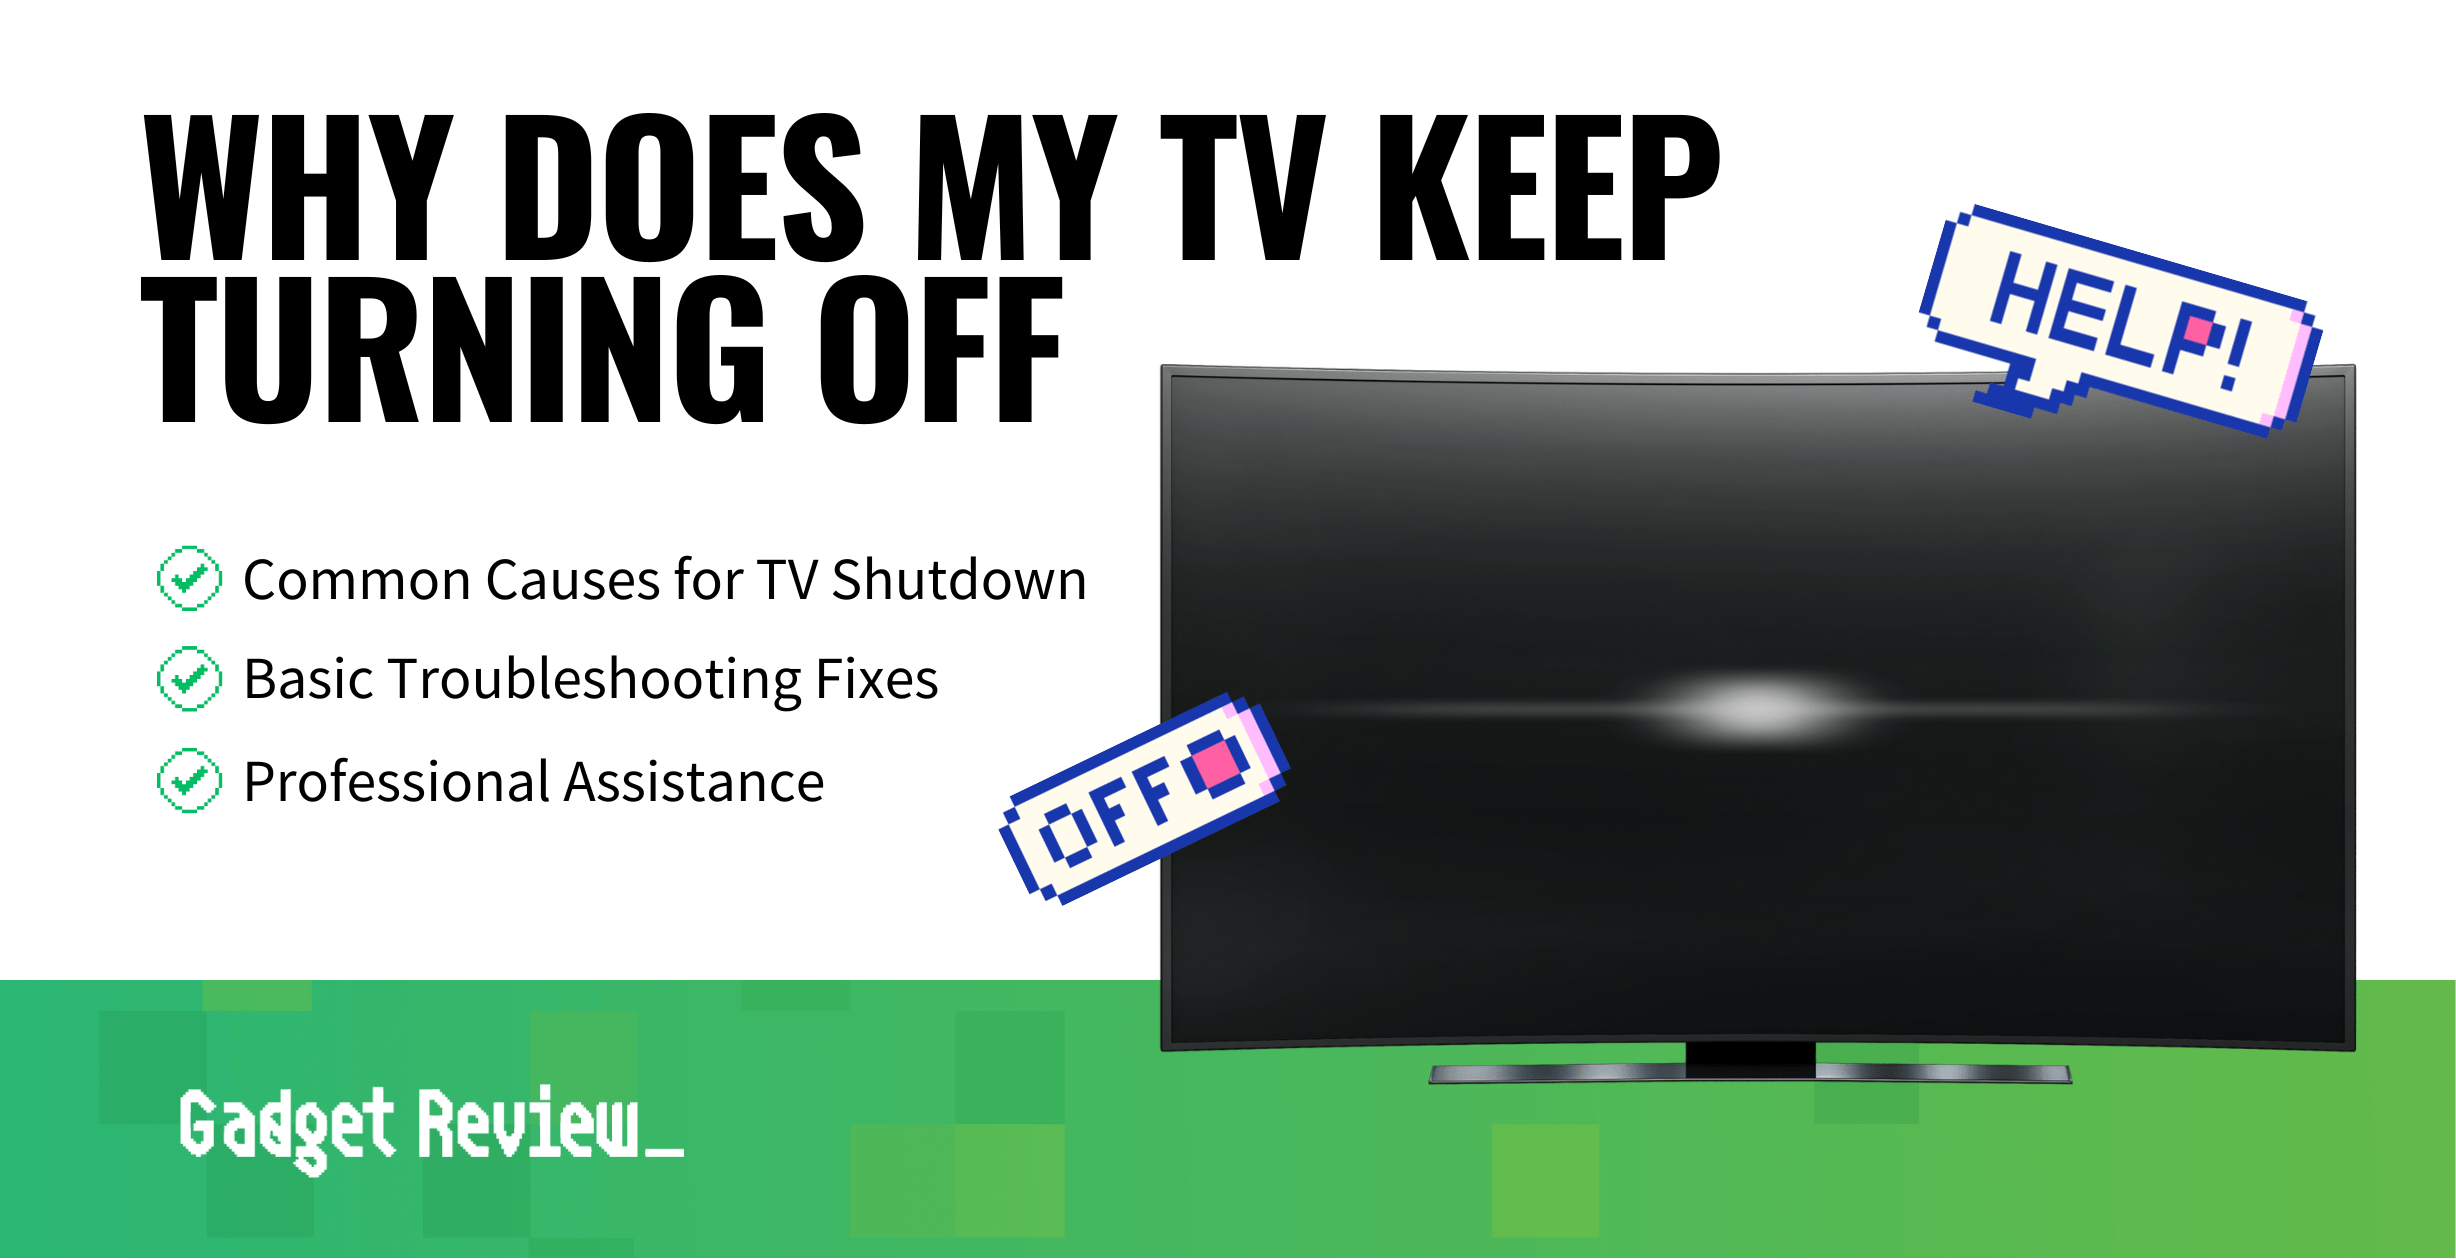 Why Does My TV Keep Turning Off?